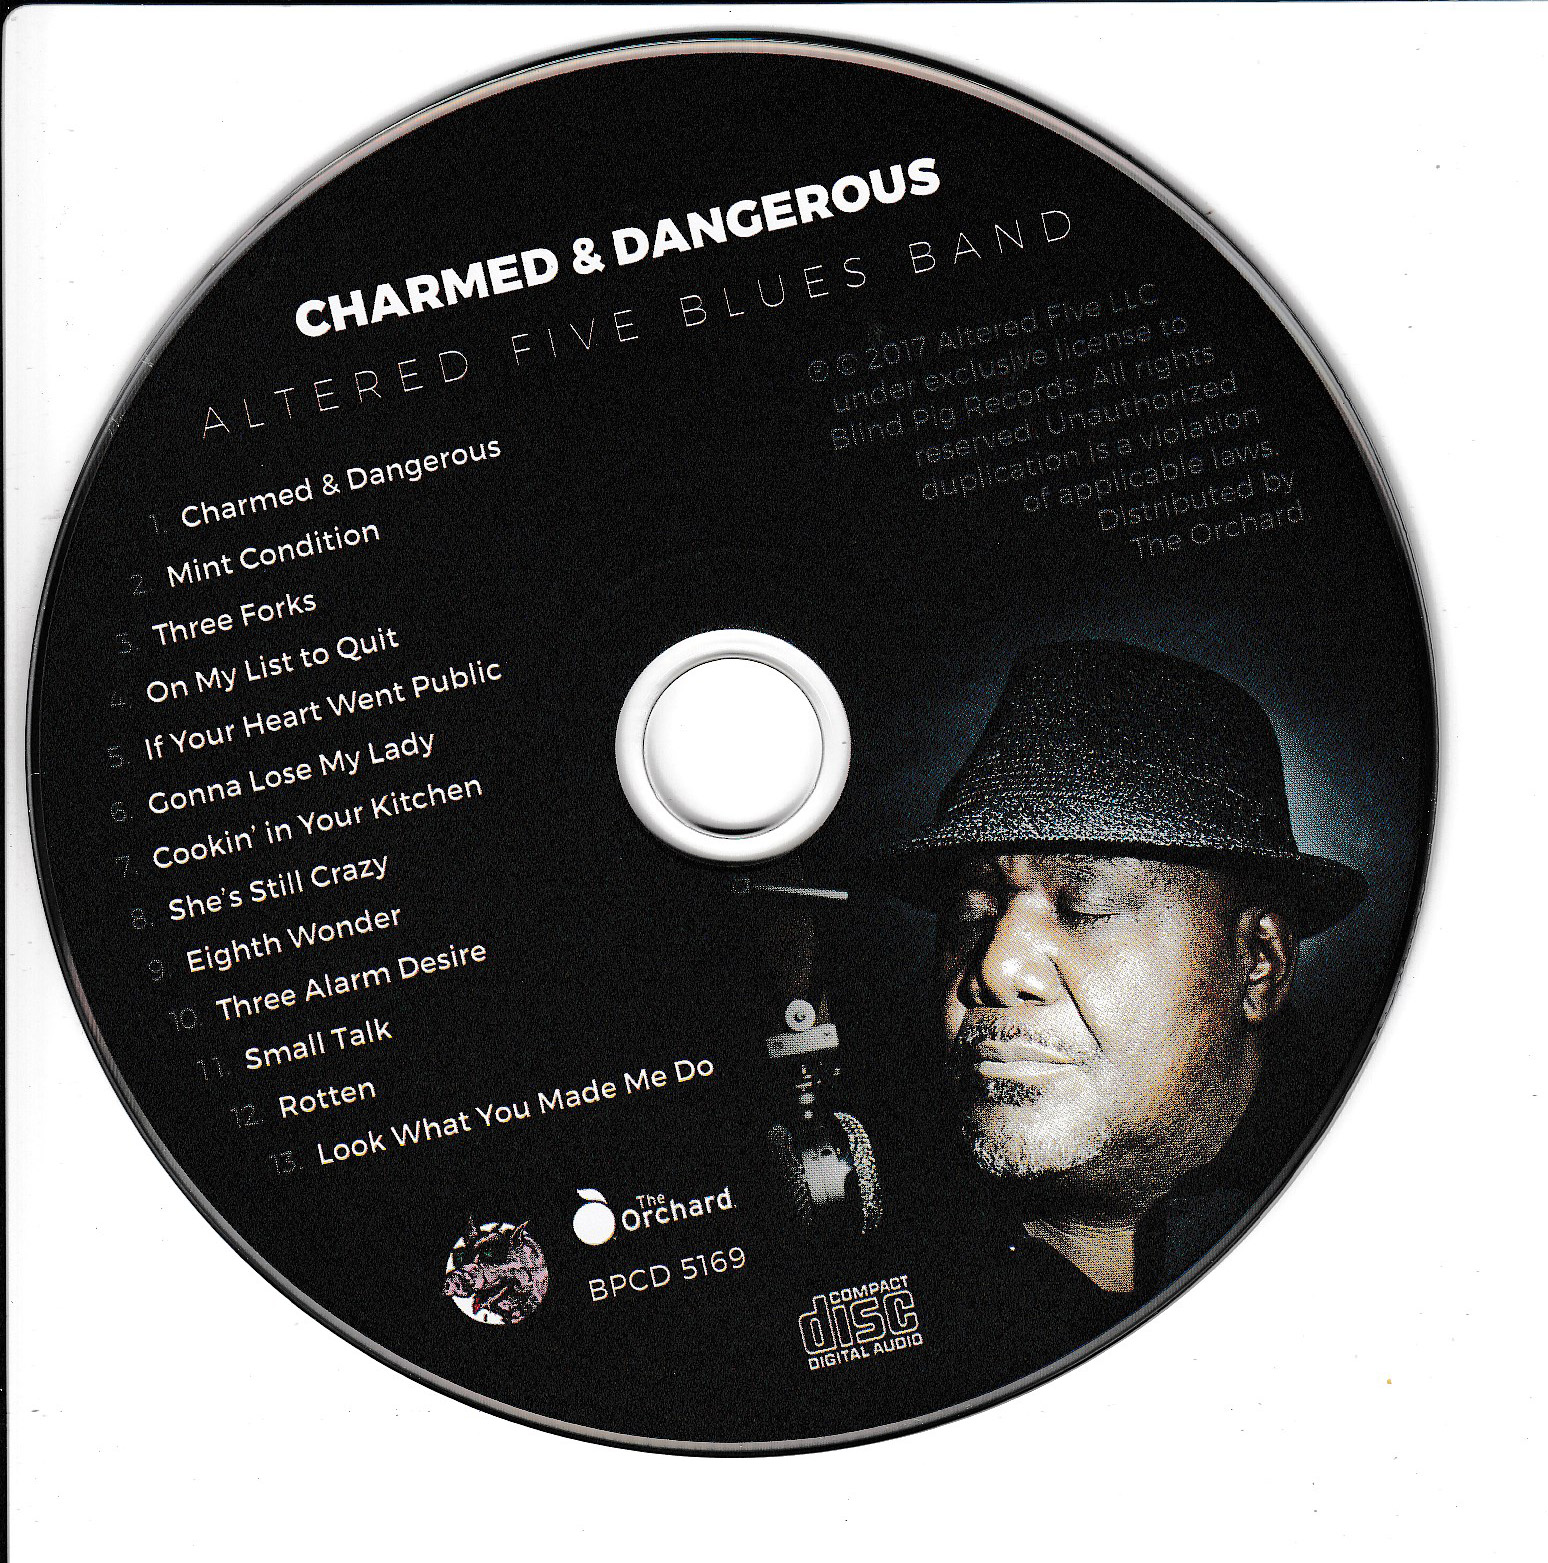 Altered Five Blues Band - Charmed & Dangerous - CD